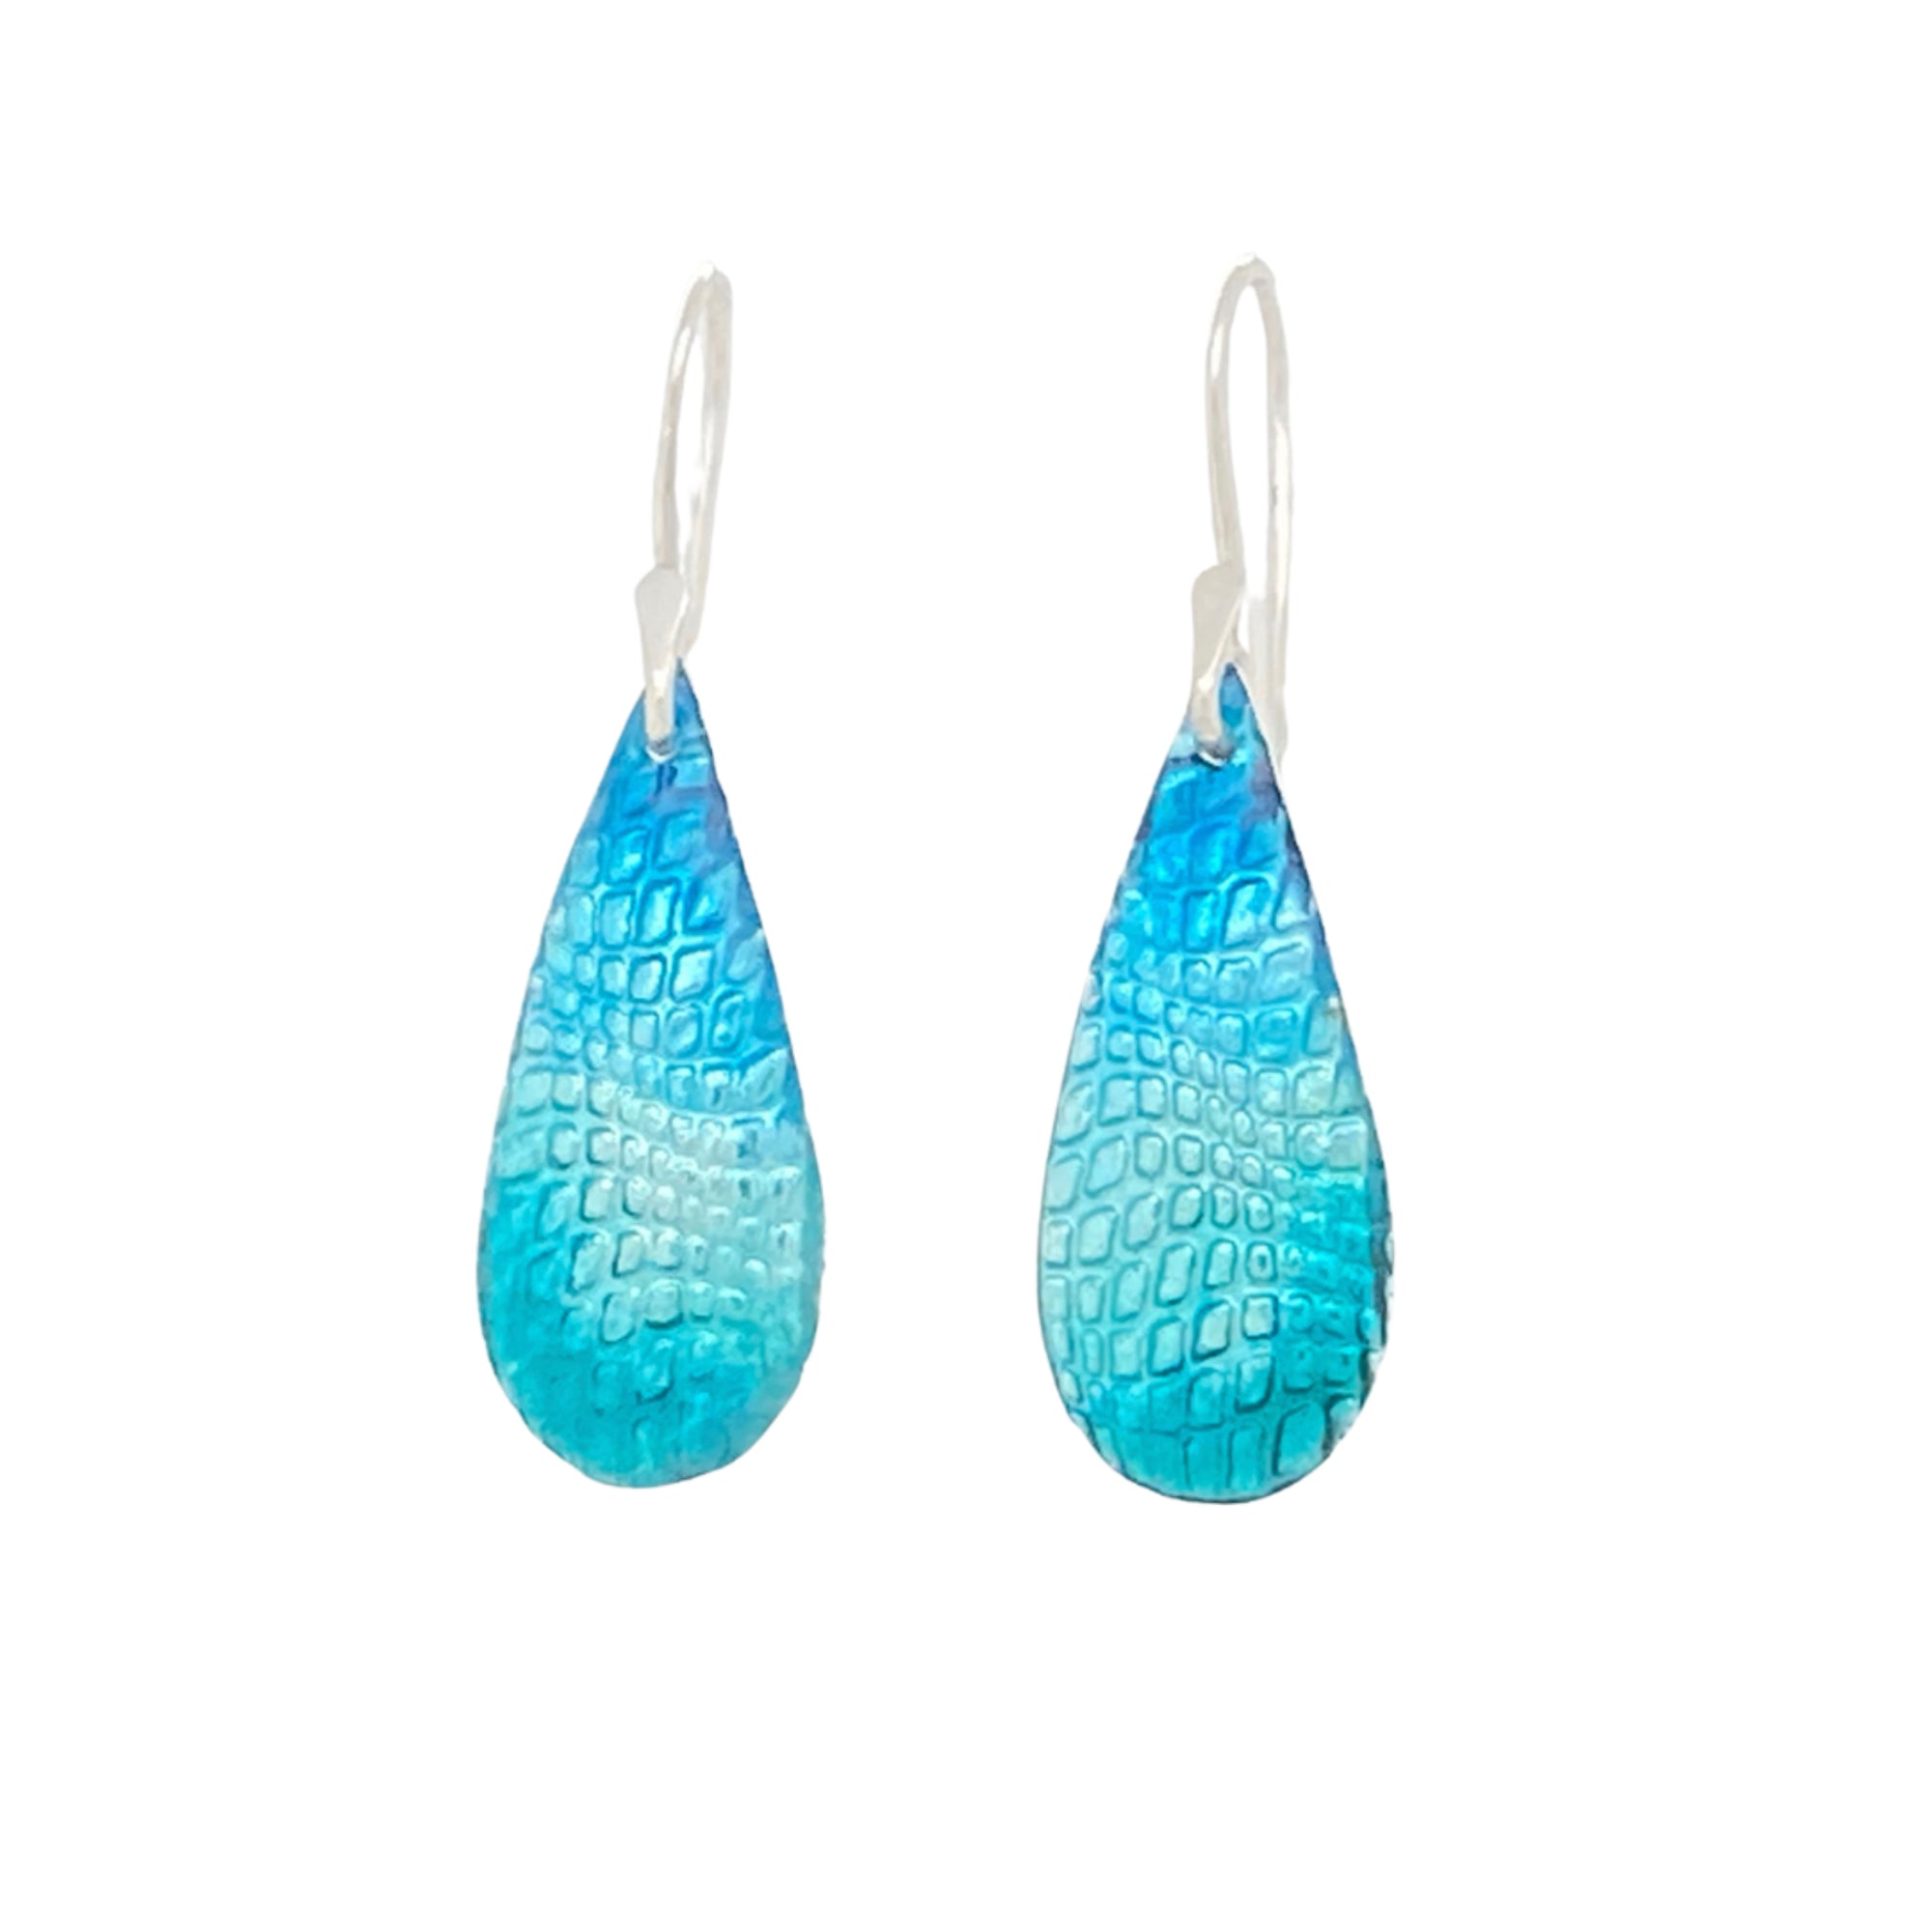 Starlight Collection: Spacetime Earrings